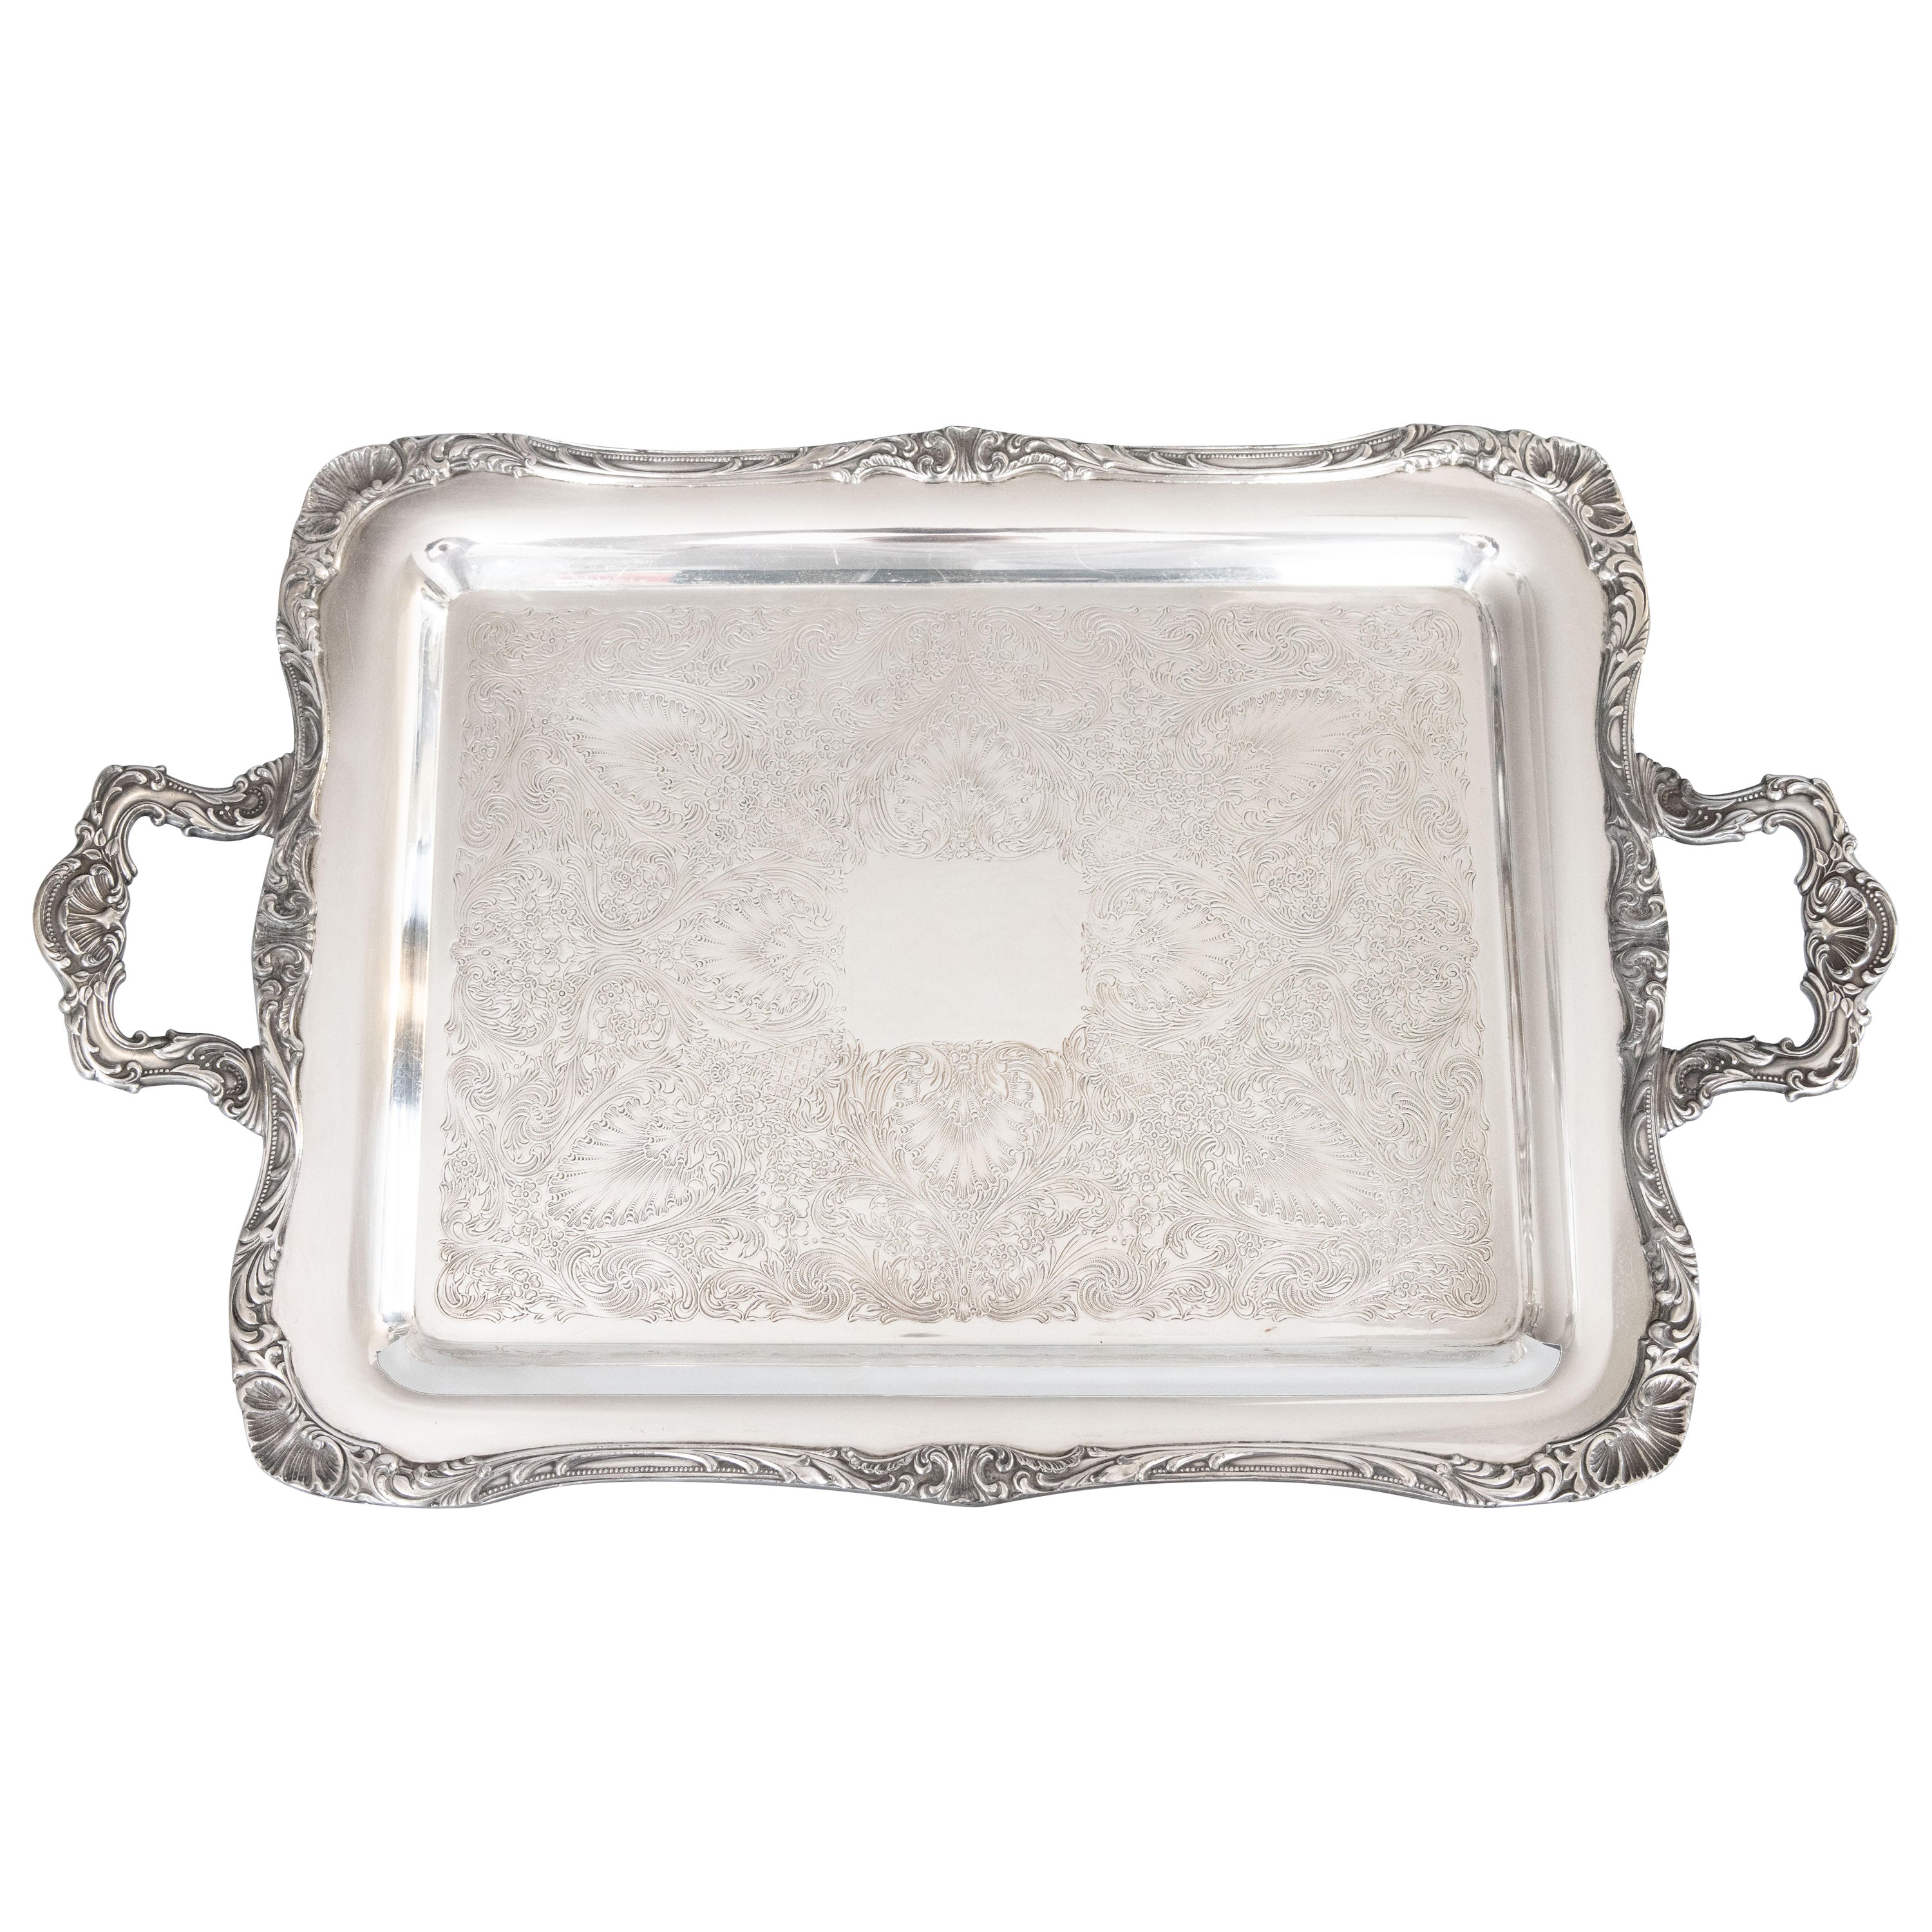 Wm Rogers Silver Plate Footed Rectangular Serving Tray With Handles, circa 1950